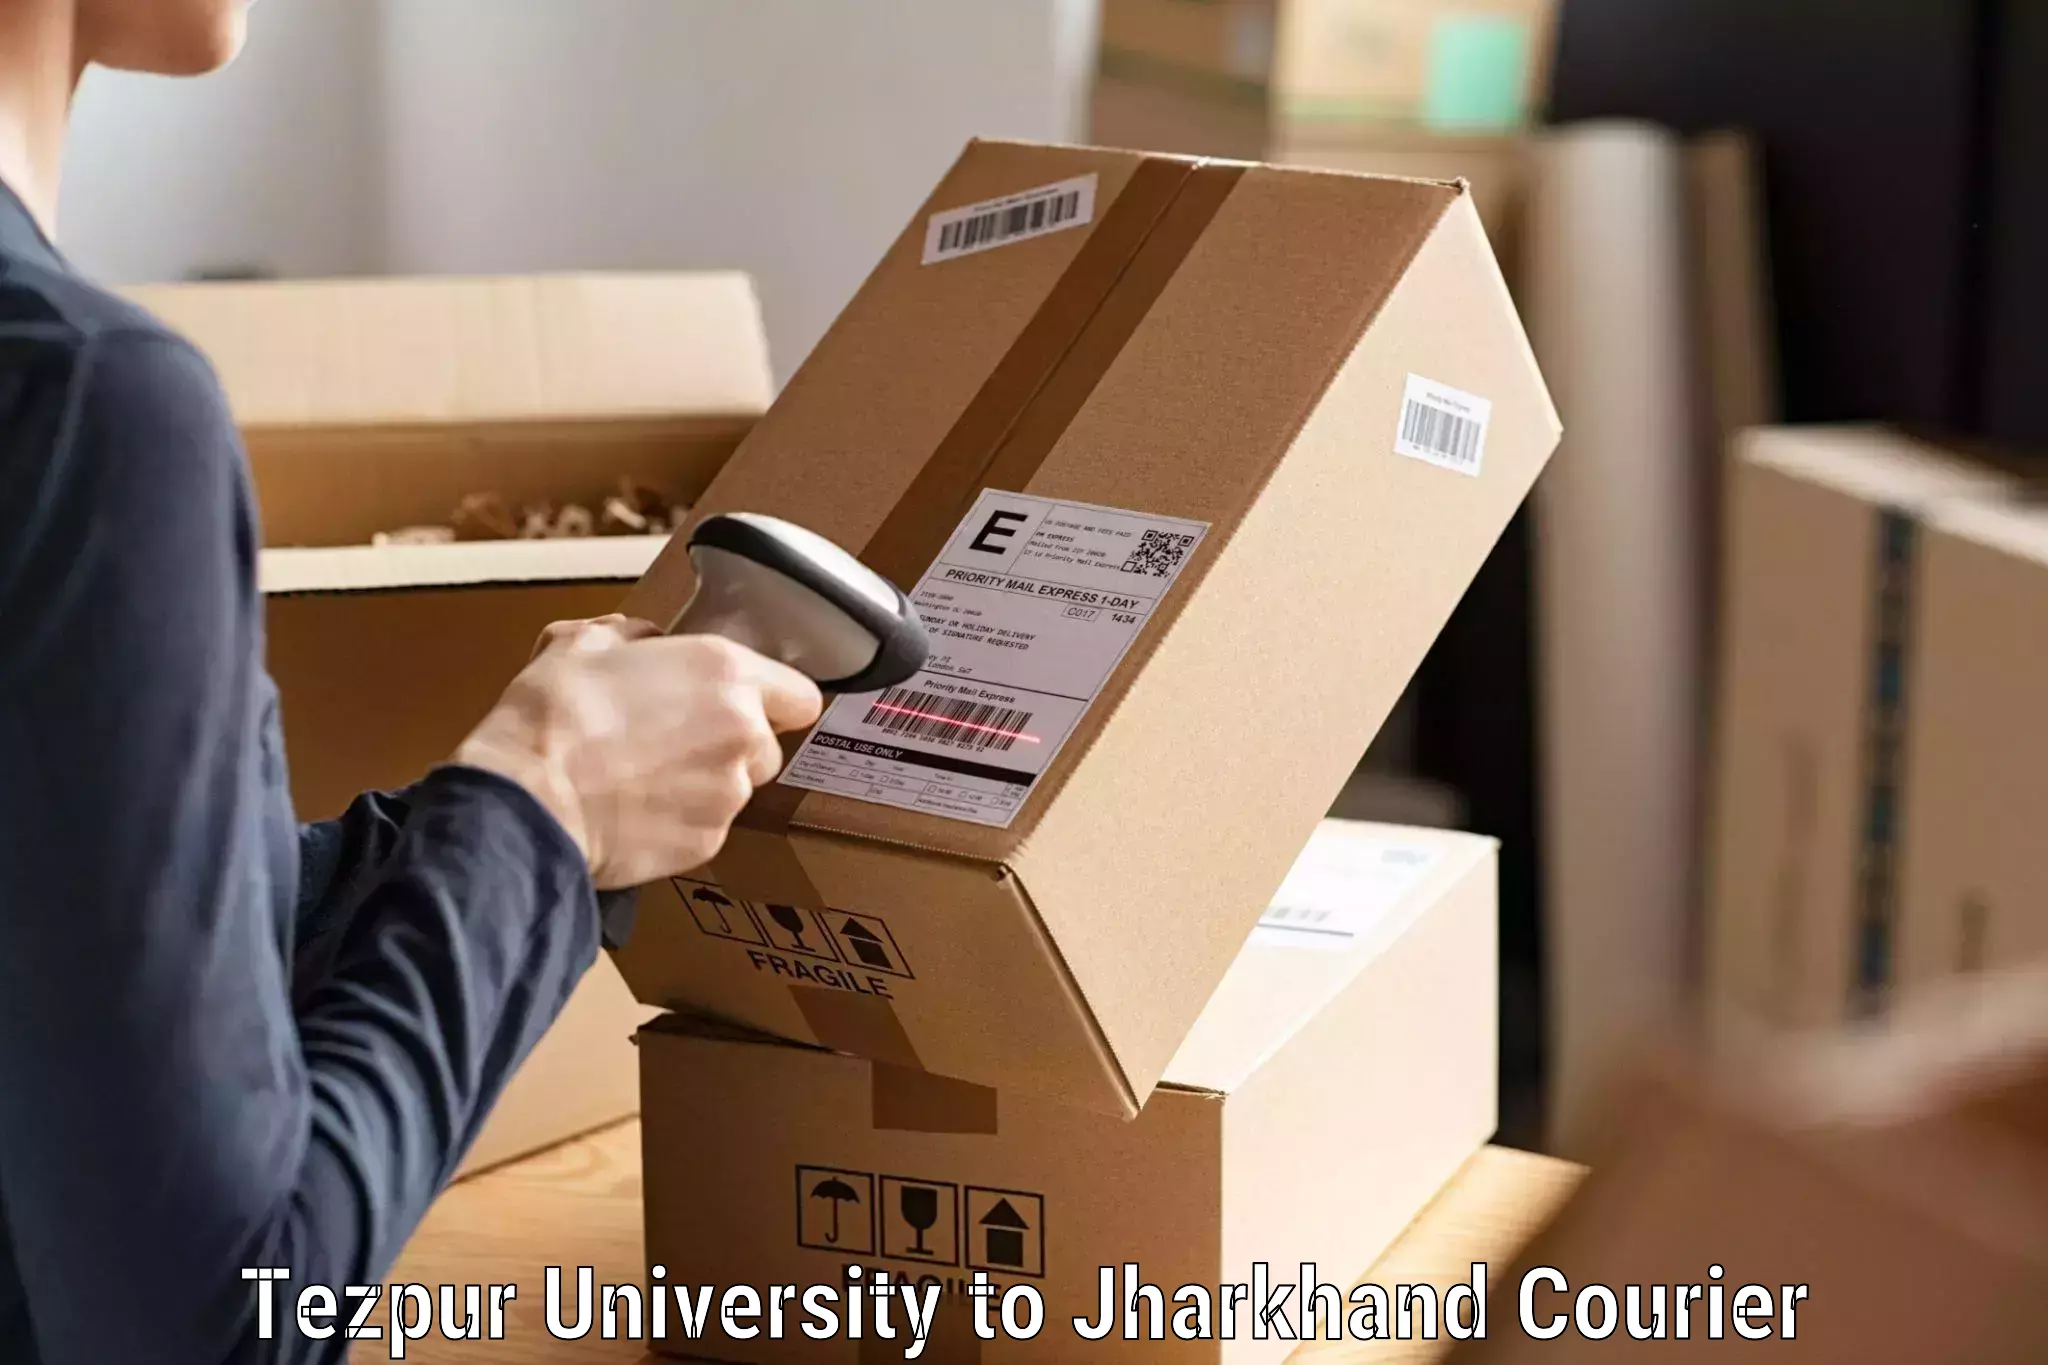 Air courier services Tezpur University to Gomoh